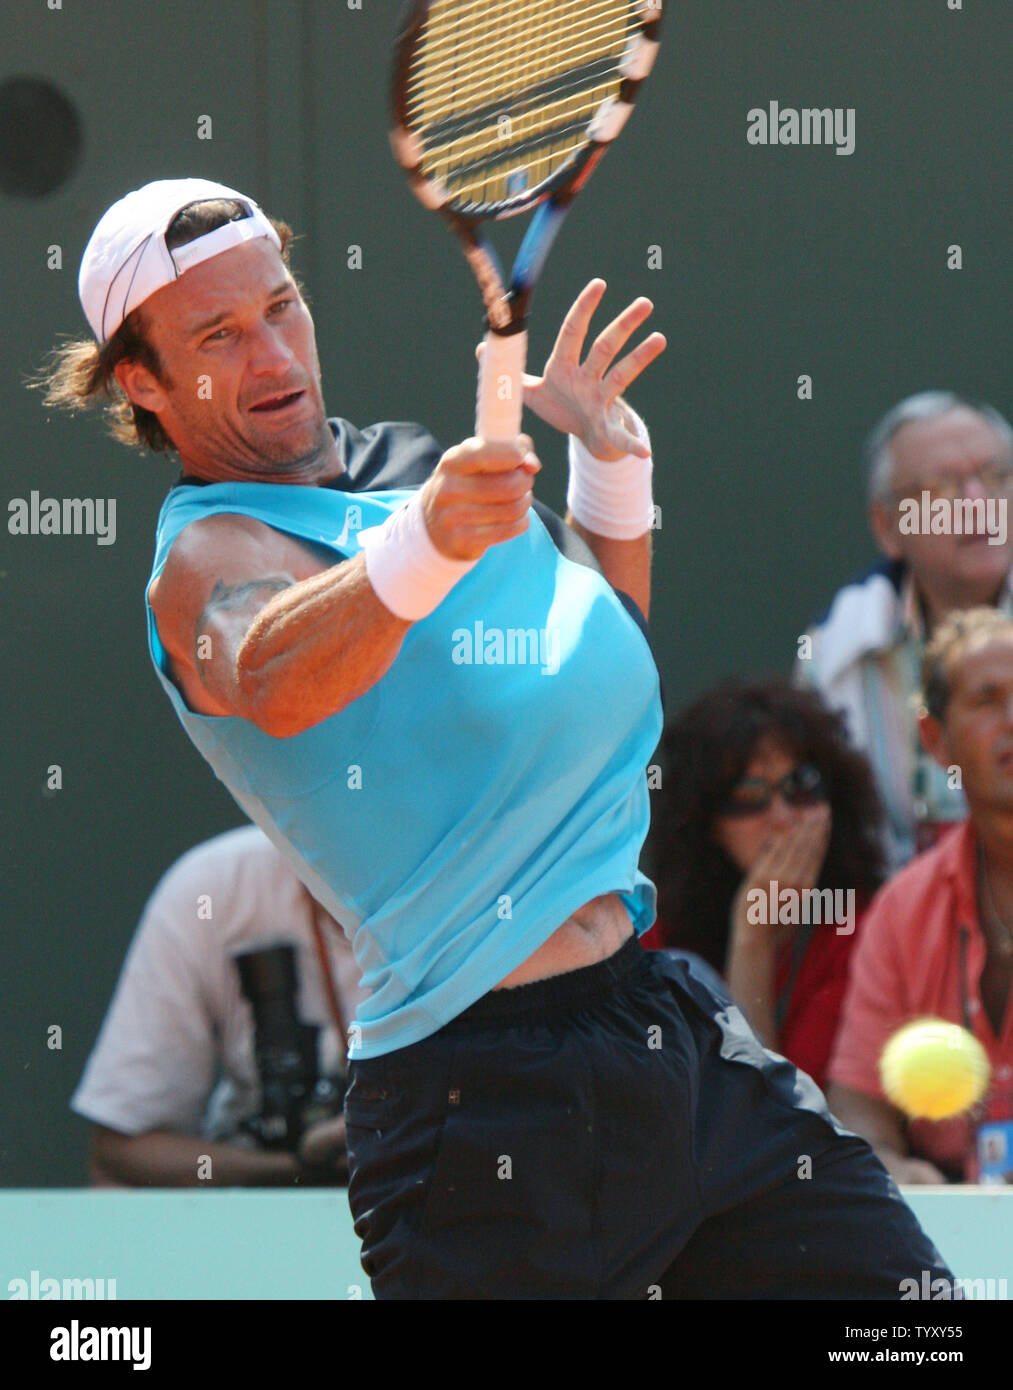 Spaniard Carlos Moya hits a forehand during his third round match against Argentinian Juan Pablo Brzezicki at the French Open at Roland Garros in Paris on June 2, 2007.  Moya, the number 23 seed, defeated the unseeded Brzezicki in straight sets 6-1, 6-3, 7-5.   (UPI Photo/ David Silpa) Stock Photo